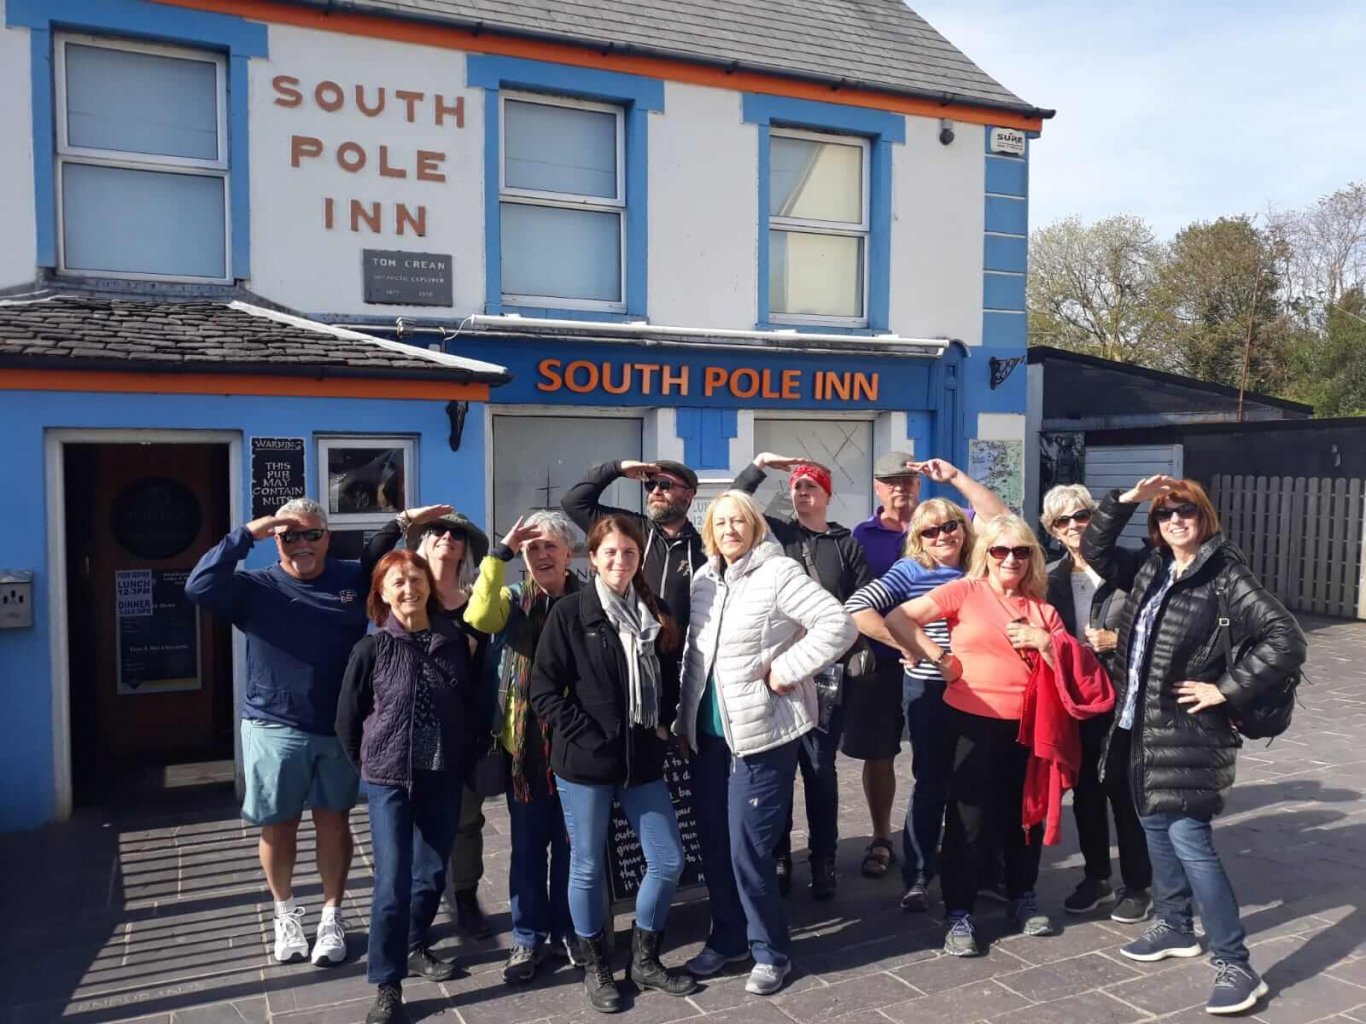 Group on an Ireland music and pub tour in South Pole Inn, Kerry